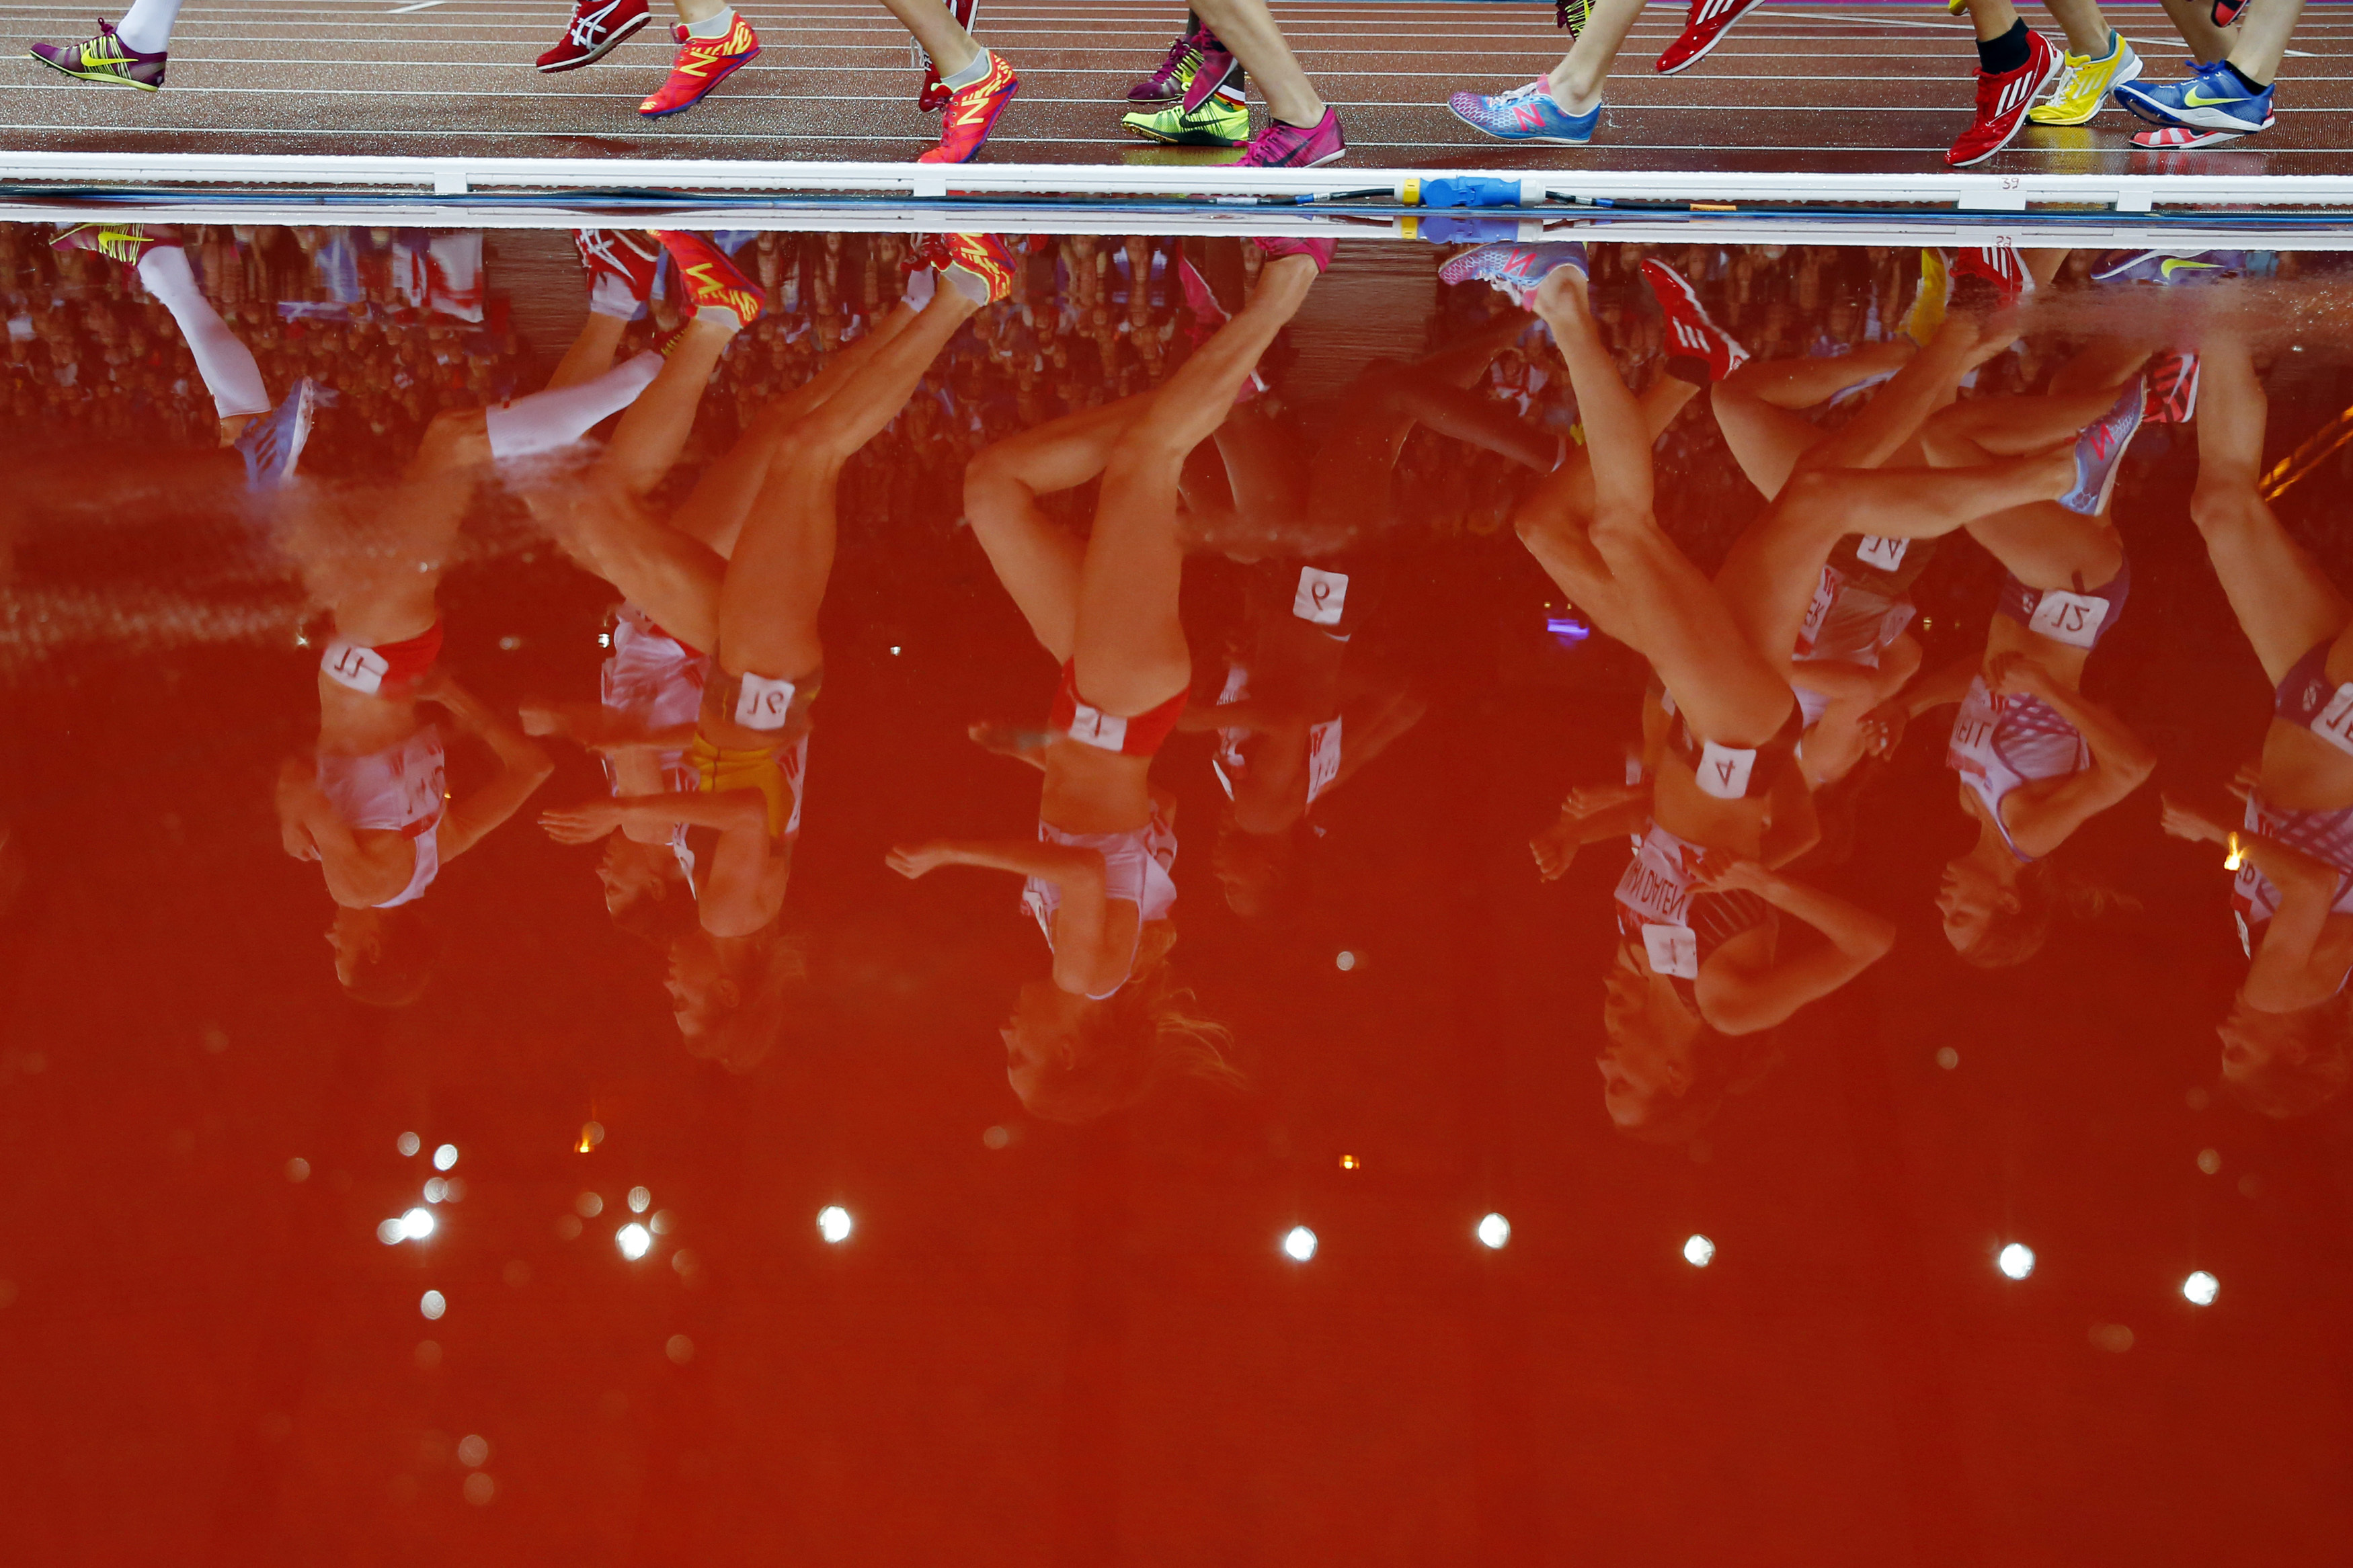 Runners are reflected in a puddle as they compete in the women's 5000m race at the 2014 Commonwealth Games in Glasgow